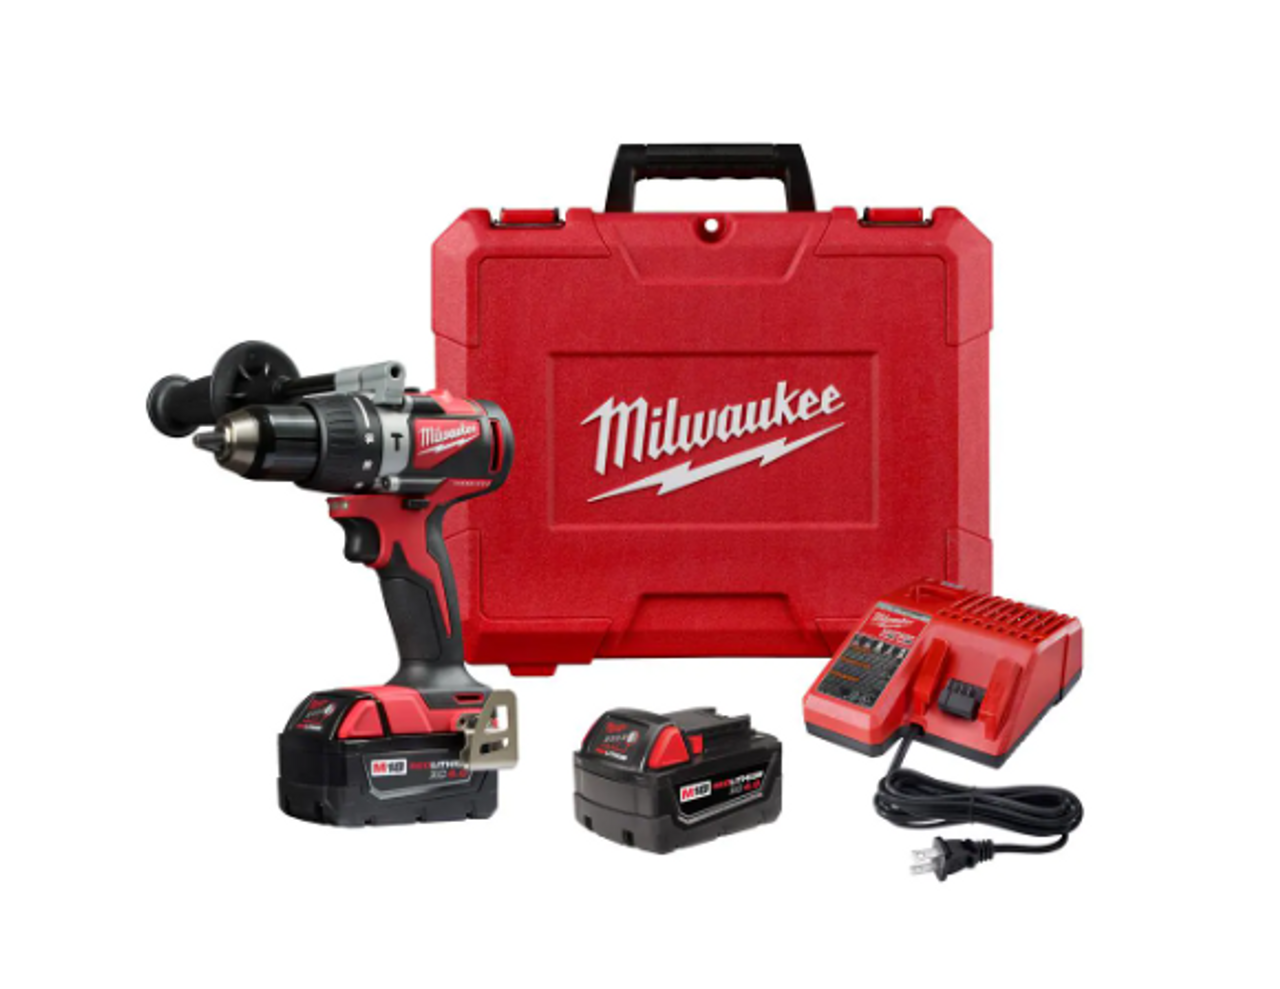 Milwaukee M18 18V Lithium-Ion Brushless Cordless 1/2 in. Compact Hammer Drill/Driver Kit w/Two 4.0Ah Batteries and Hard Case